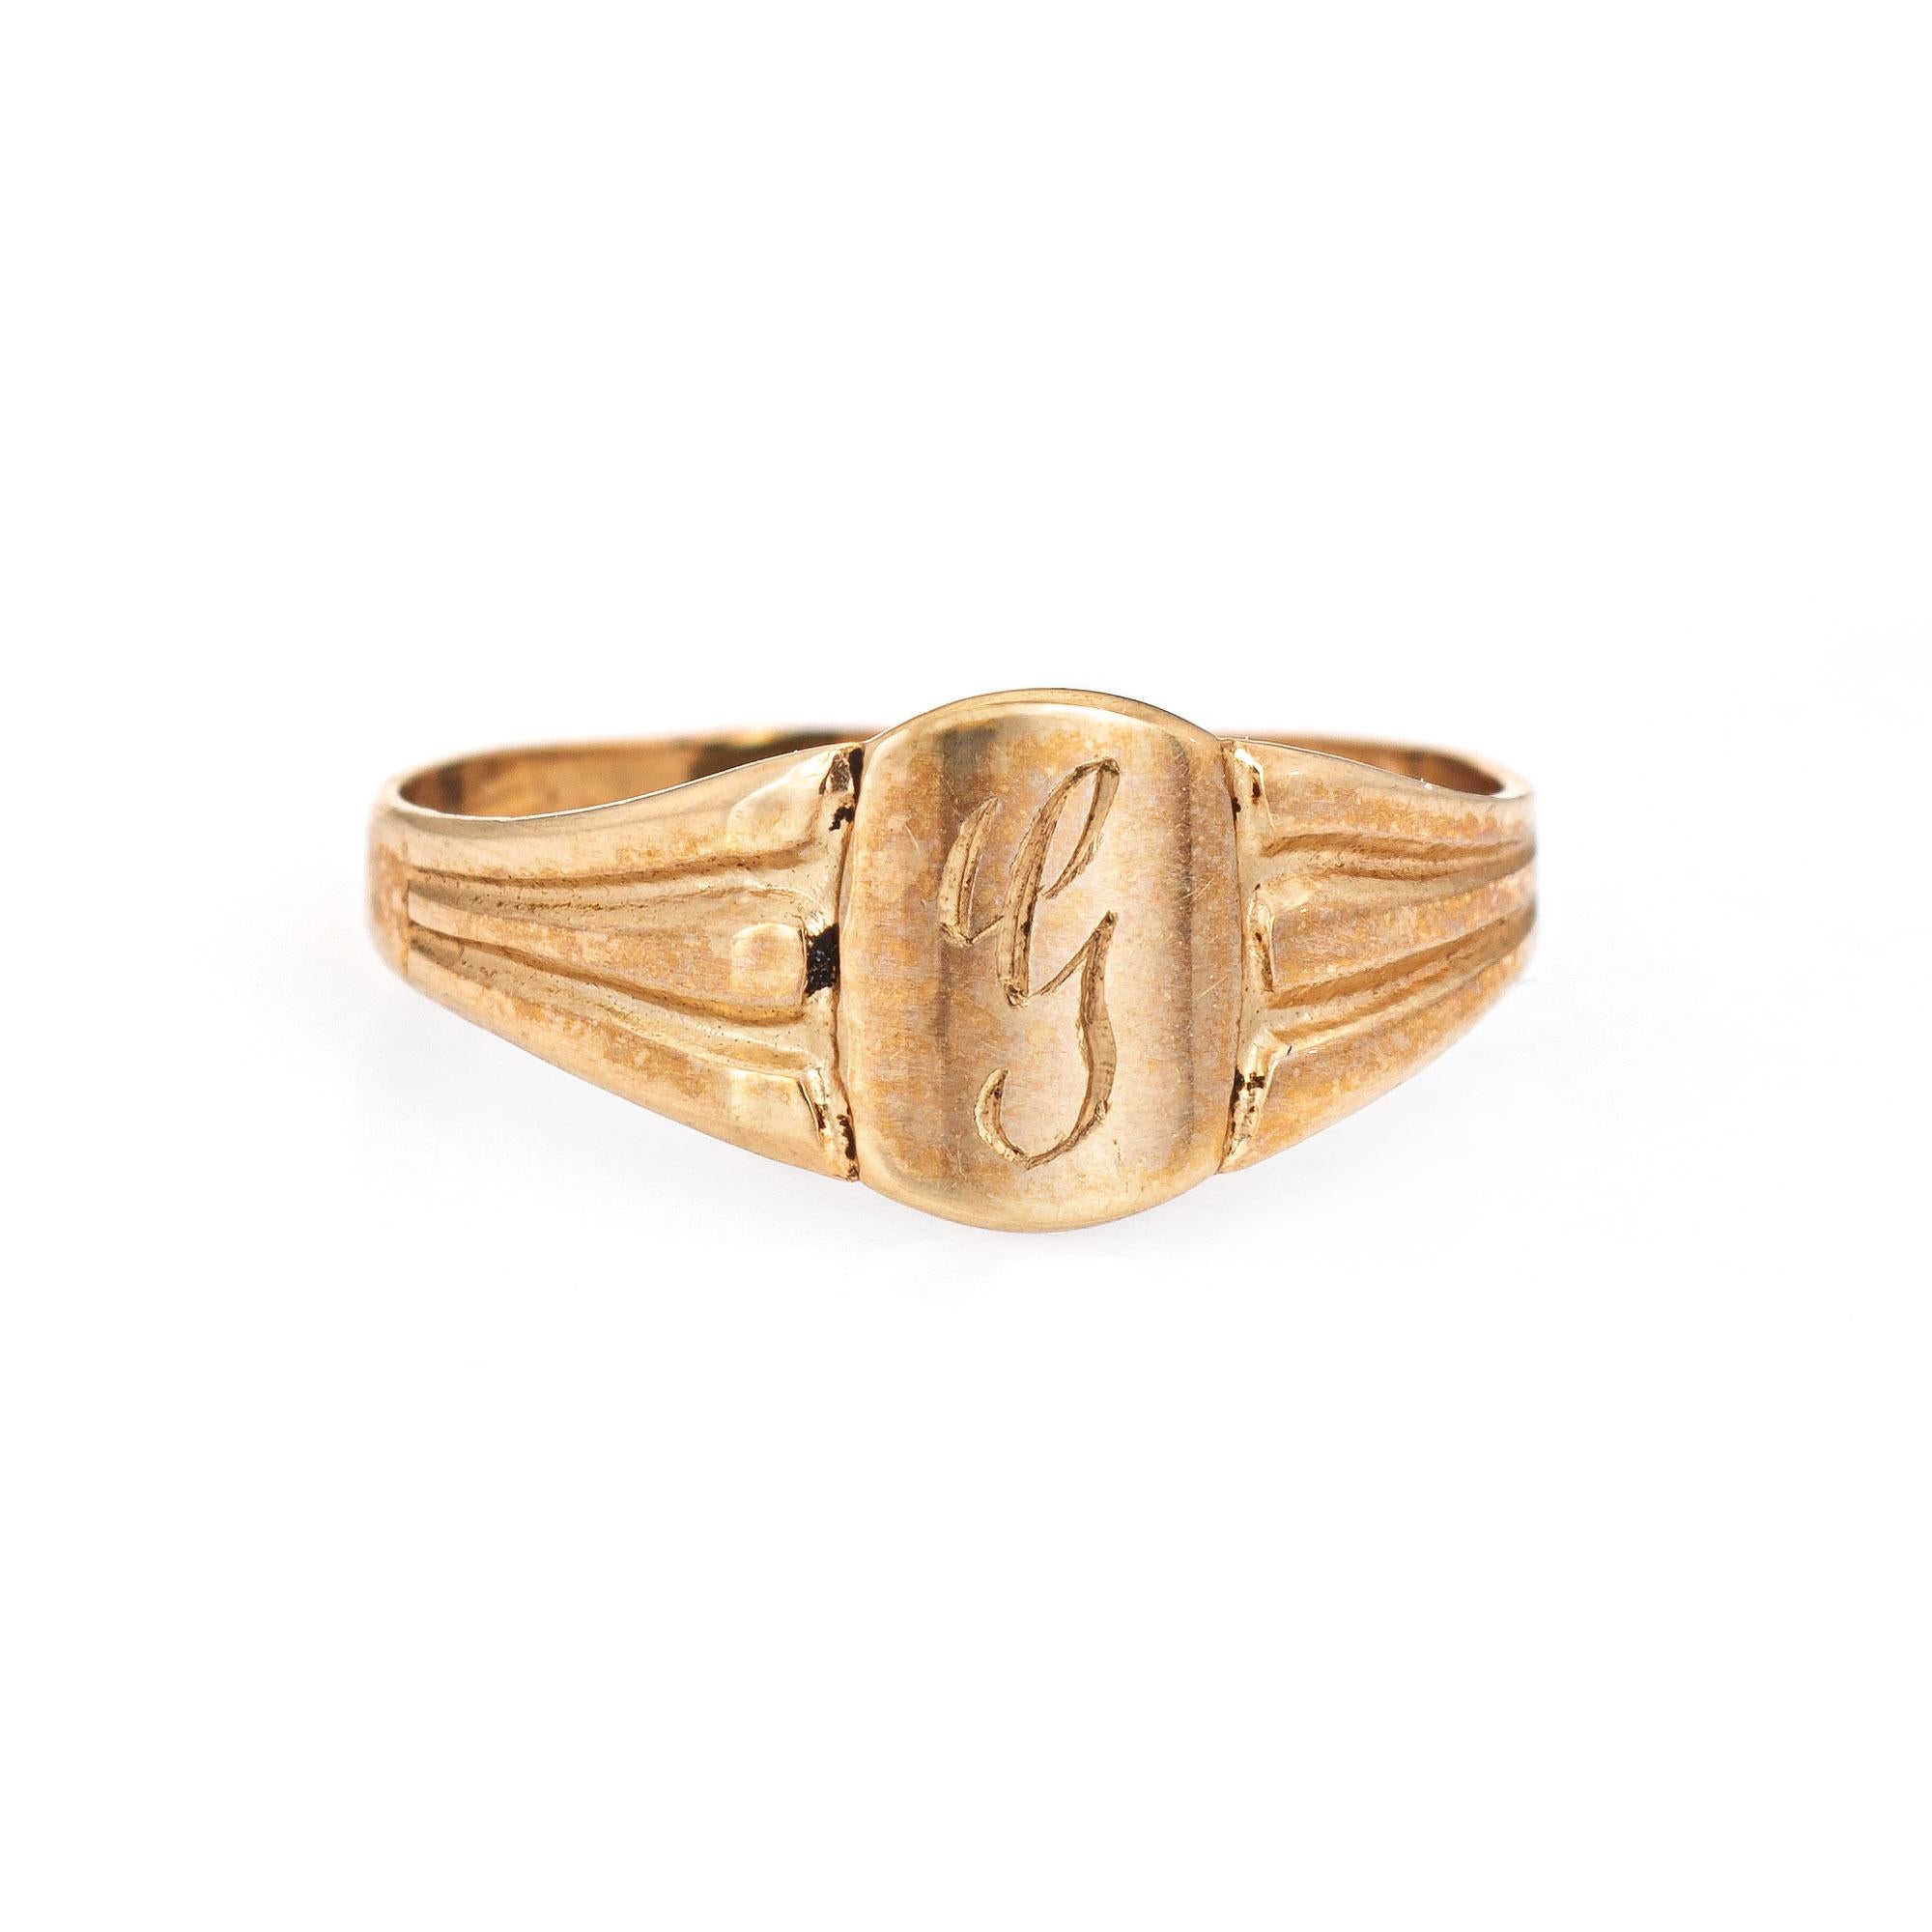 Finely detailed vintage Art Deco baby ring (circa 1920s to 1930s) crafted in 10k yellow gold. 

The sweet Art Deco era baby signet ring is engraved with the letter 'G' in old cursive font. The side shoulders feature column detail. The petite ring is